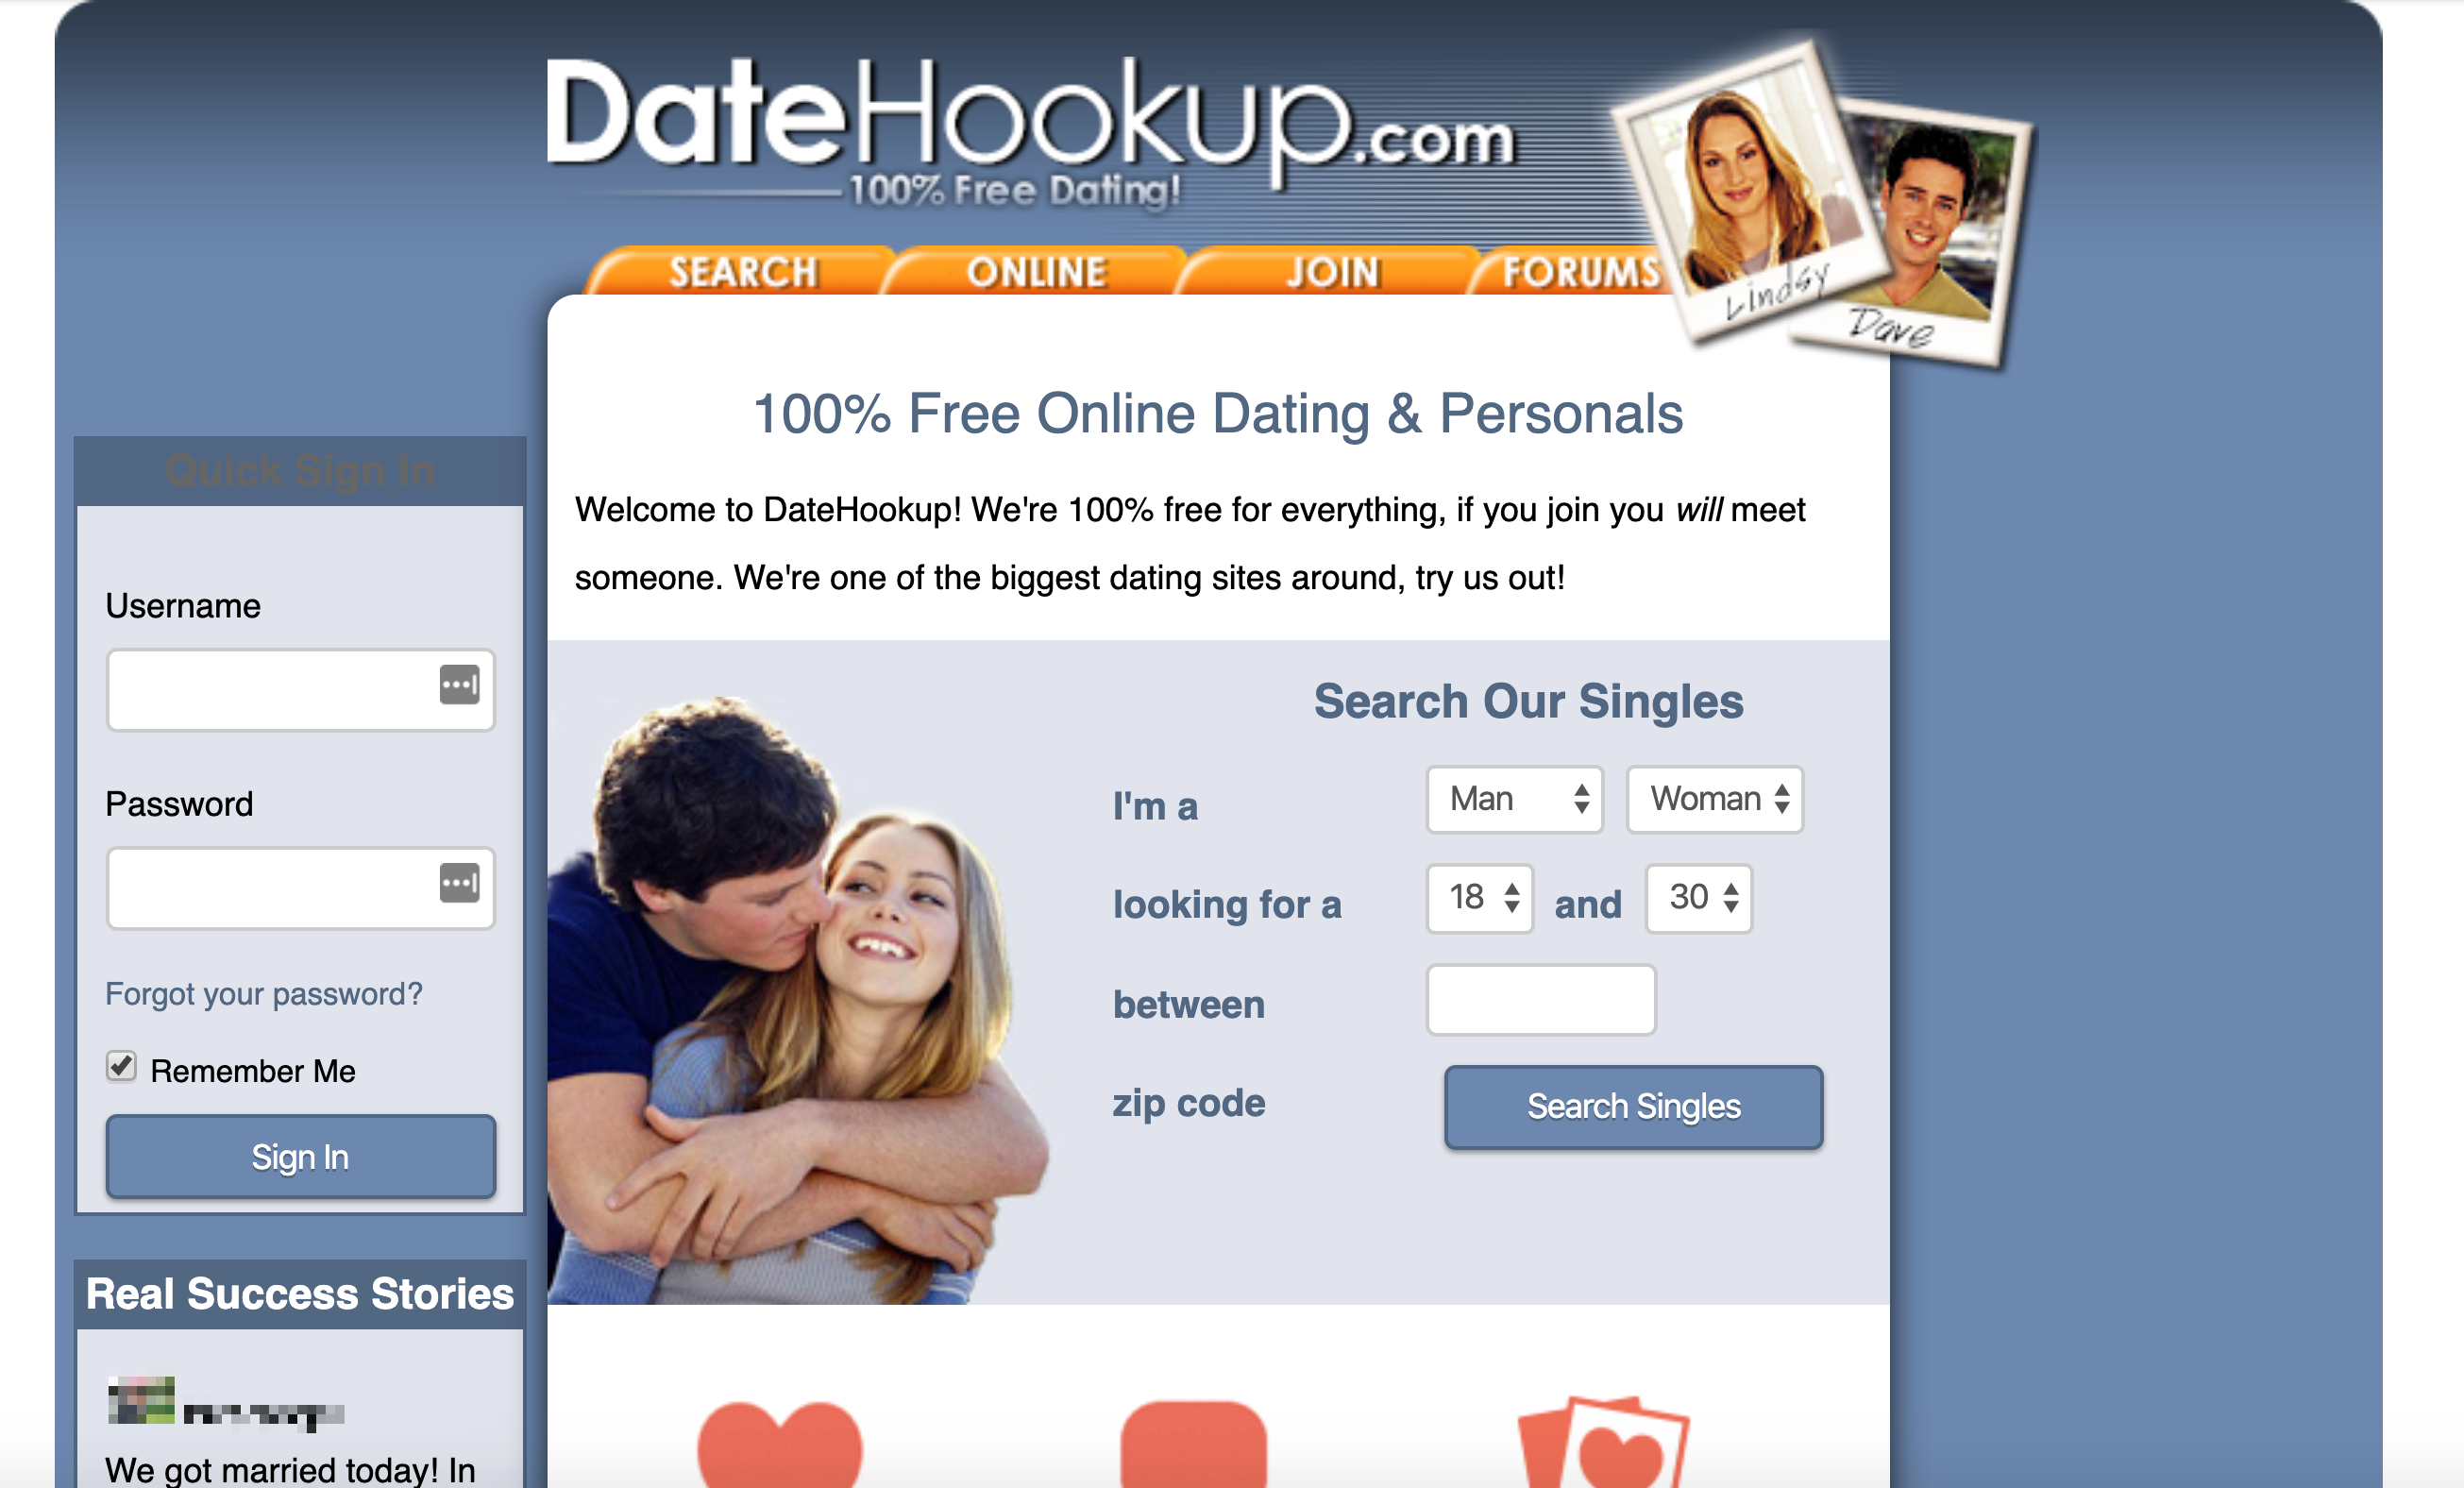 is datehookup a free dating site.